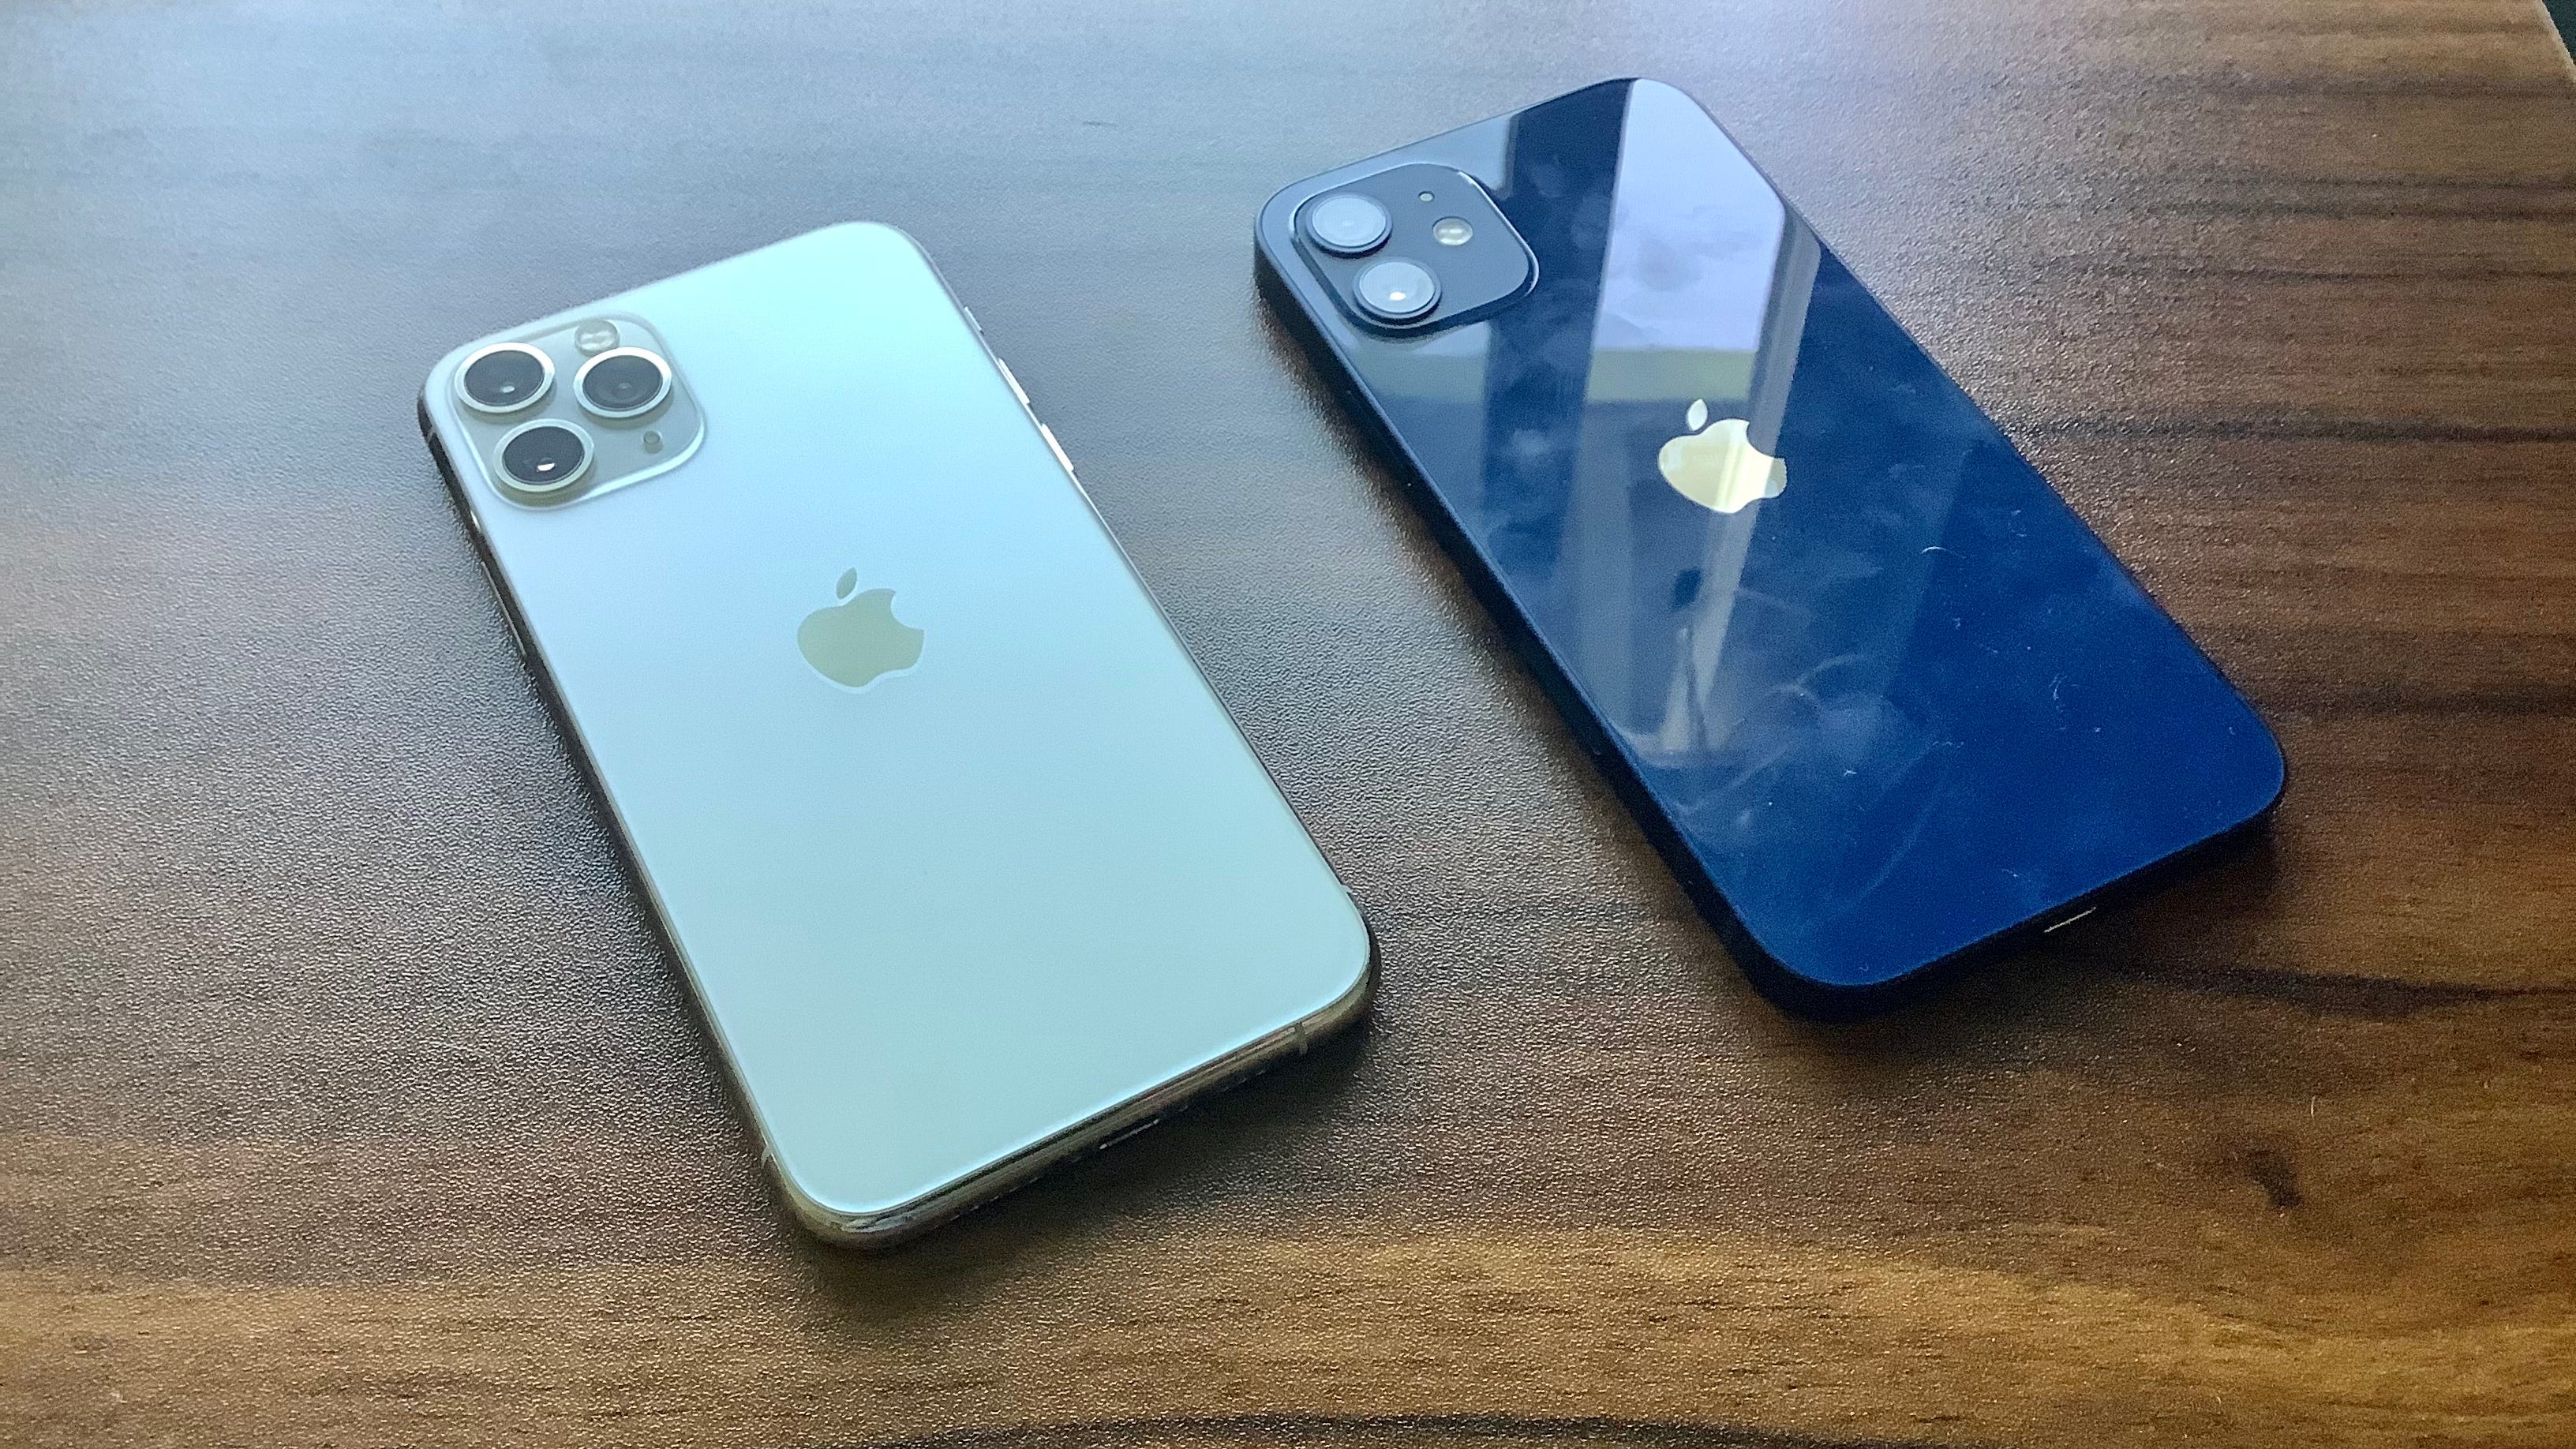 Iphone 12 Review Feeling Blue An Iphone Choice Based On Color Or By Paul Alvarez Techuisite